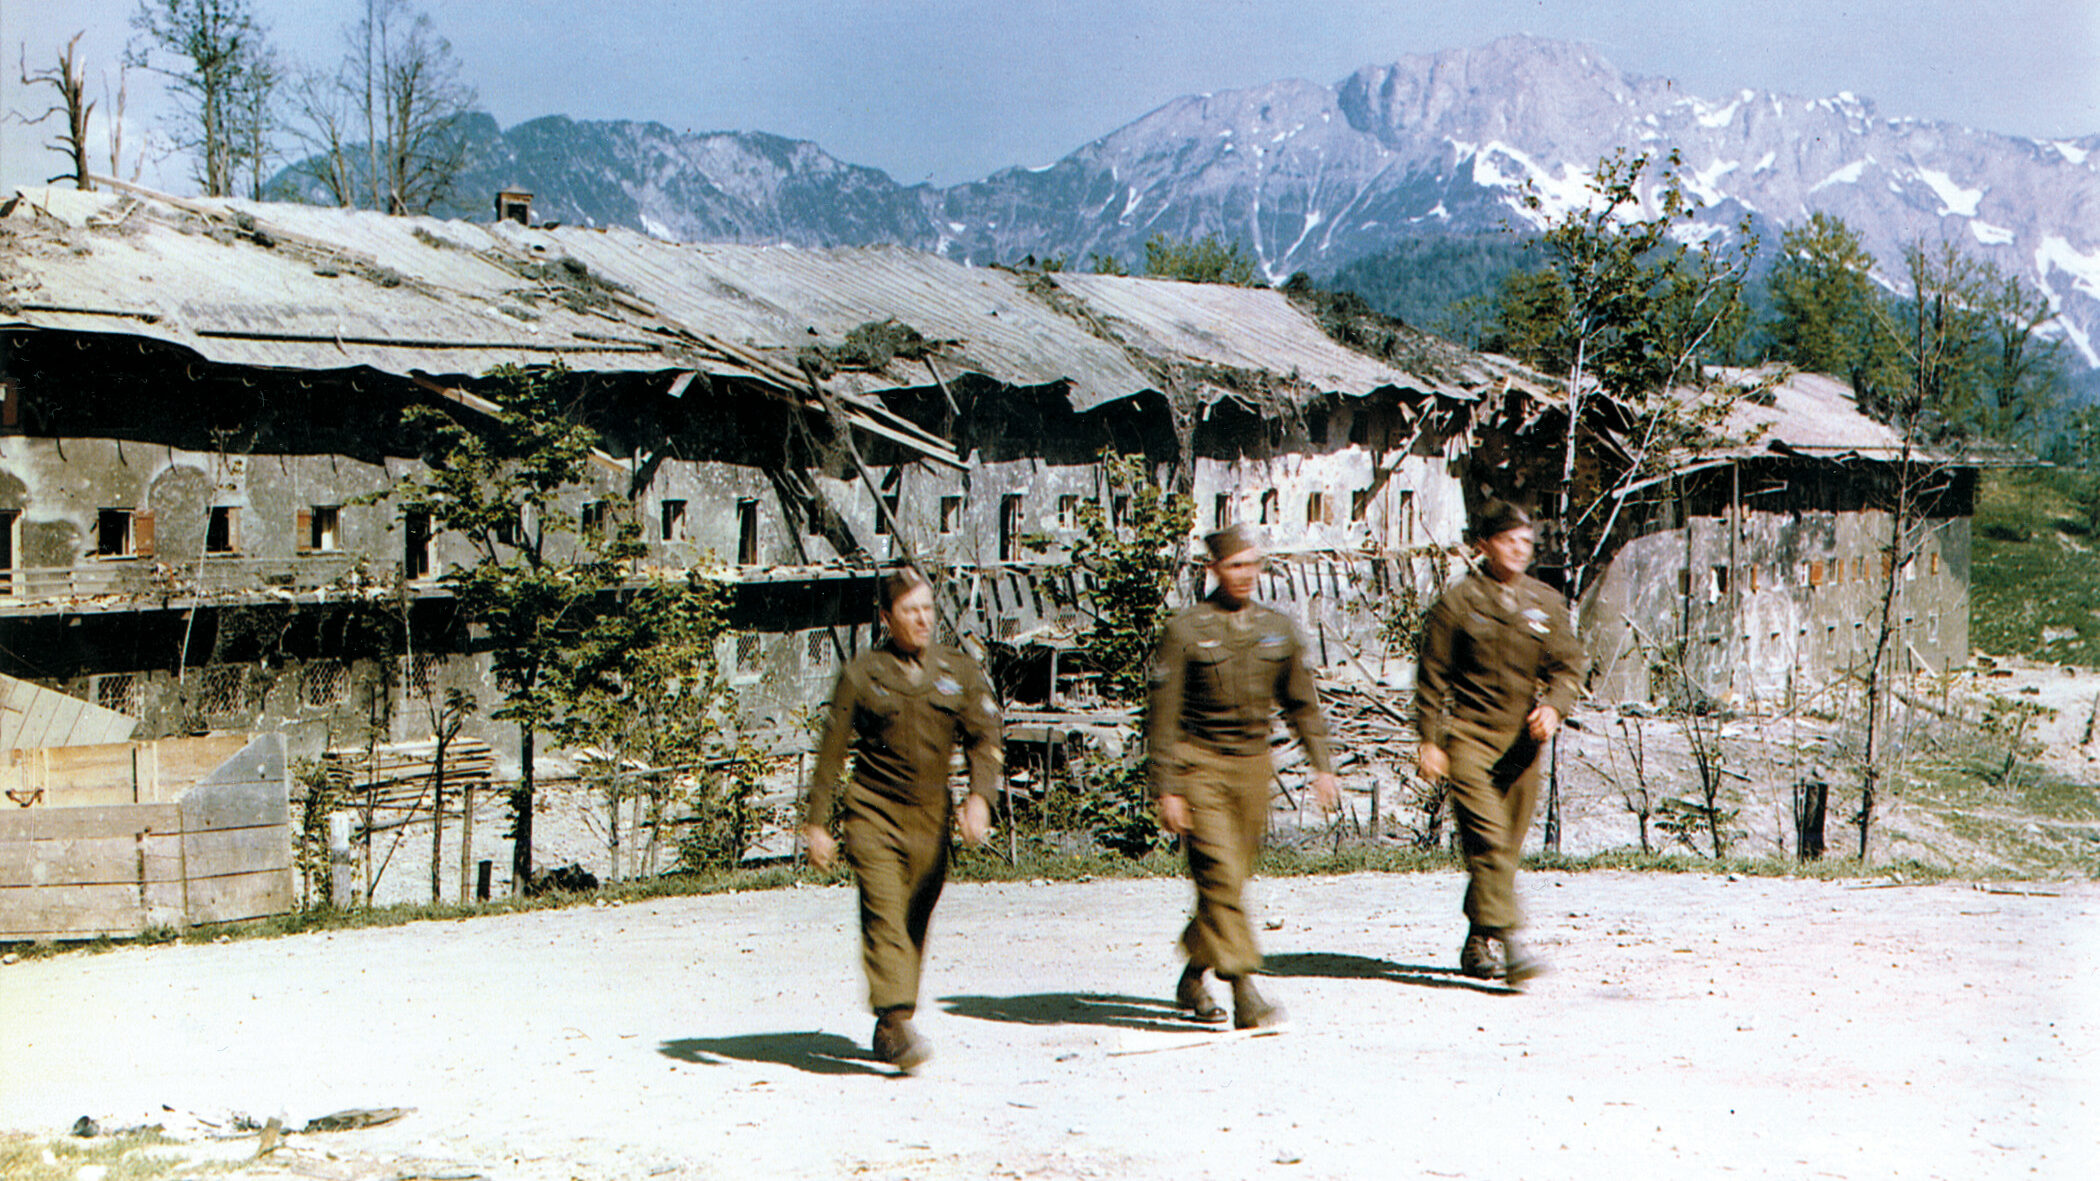 U.S. soldiers walk past the bombed-out barracks that once housed members of Adolf Hitler’s SS guard. The building was hit during an Allied bombing raid.